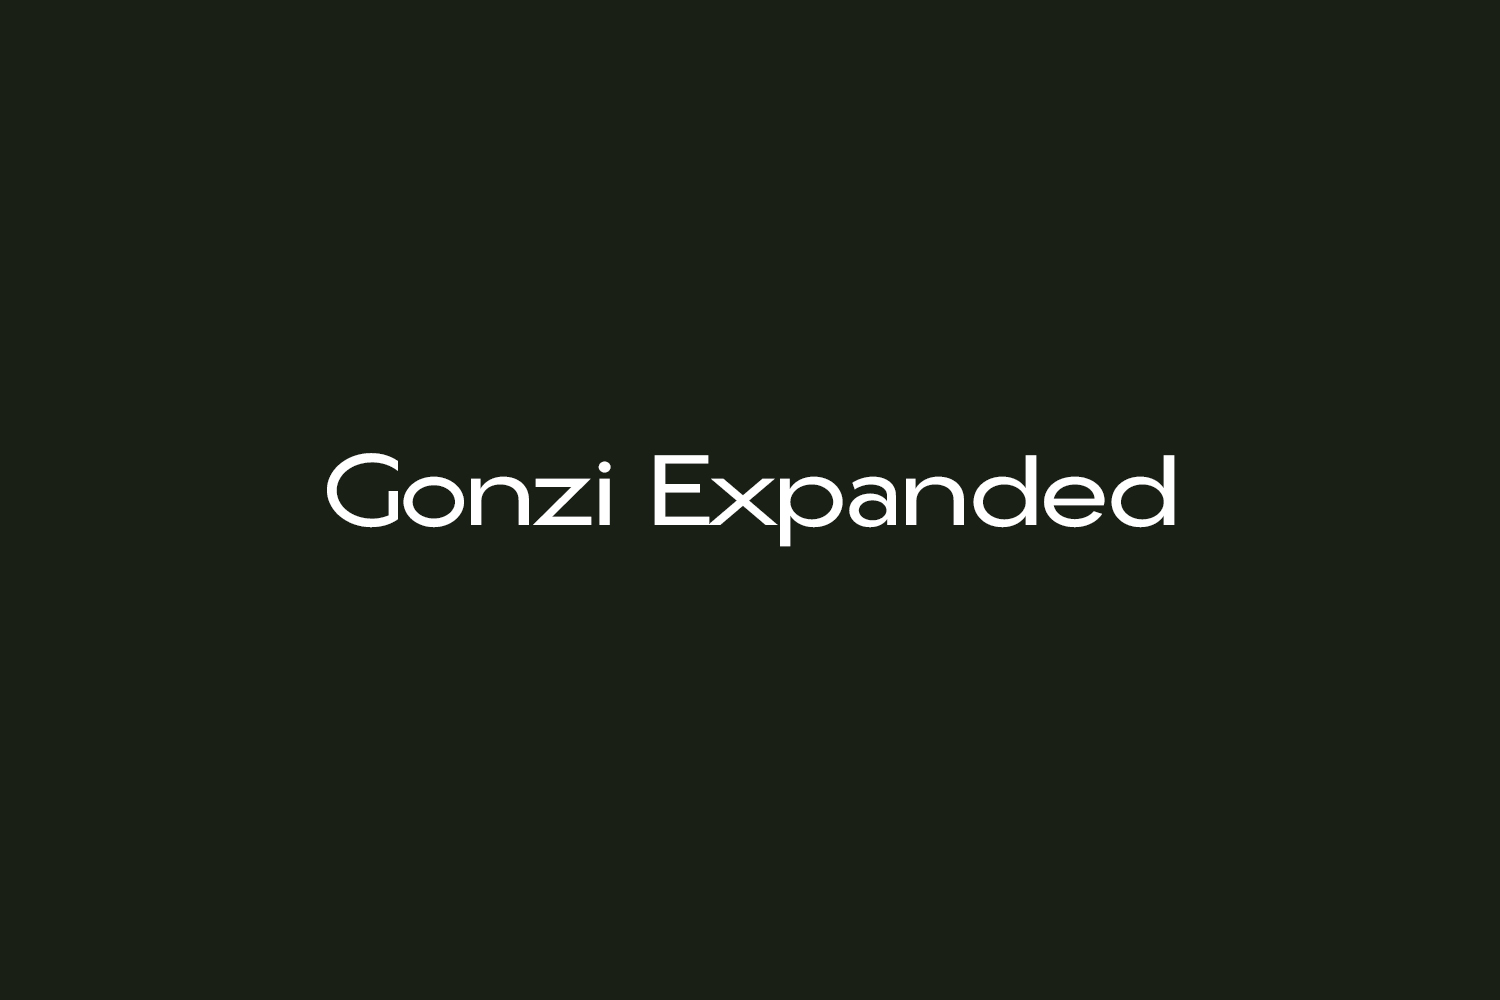 Gonzi Expanded Free Font